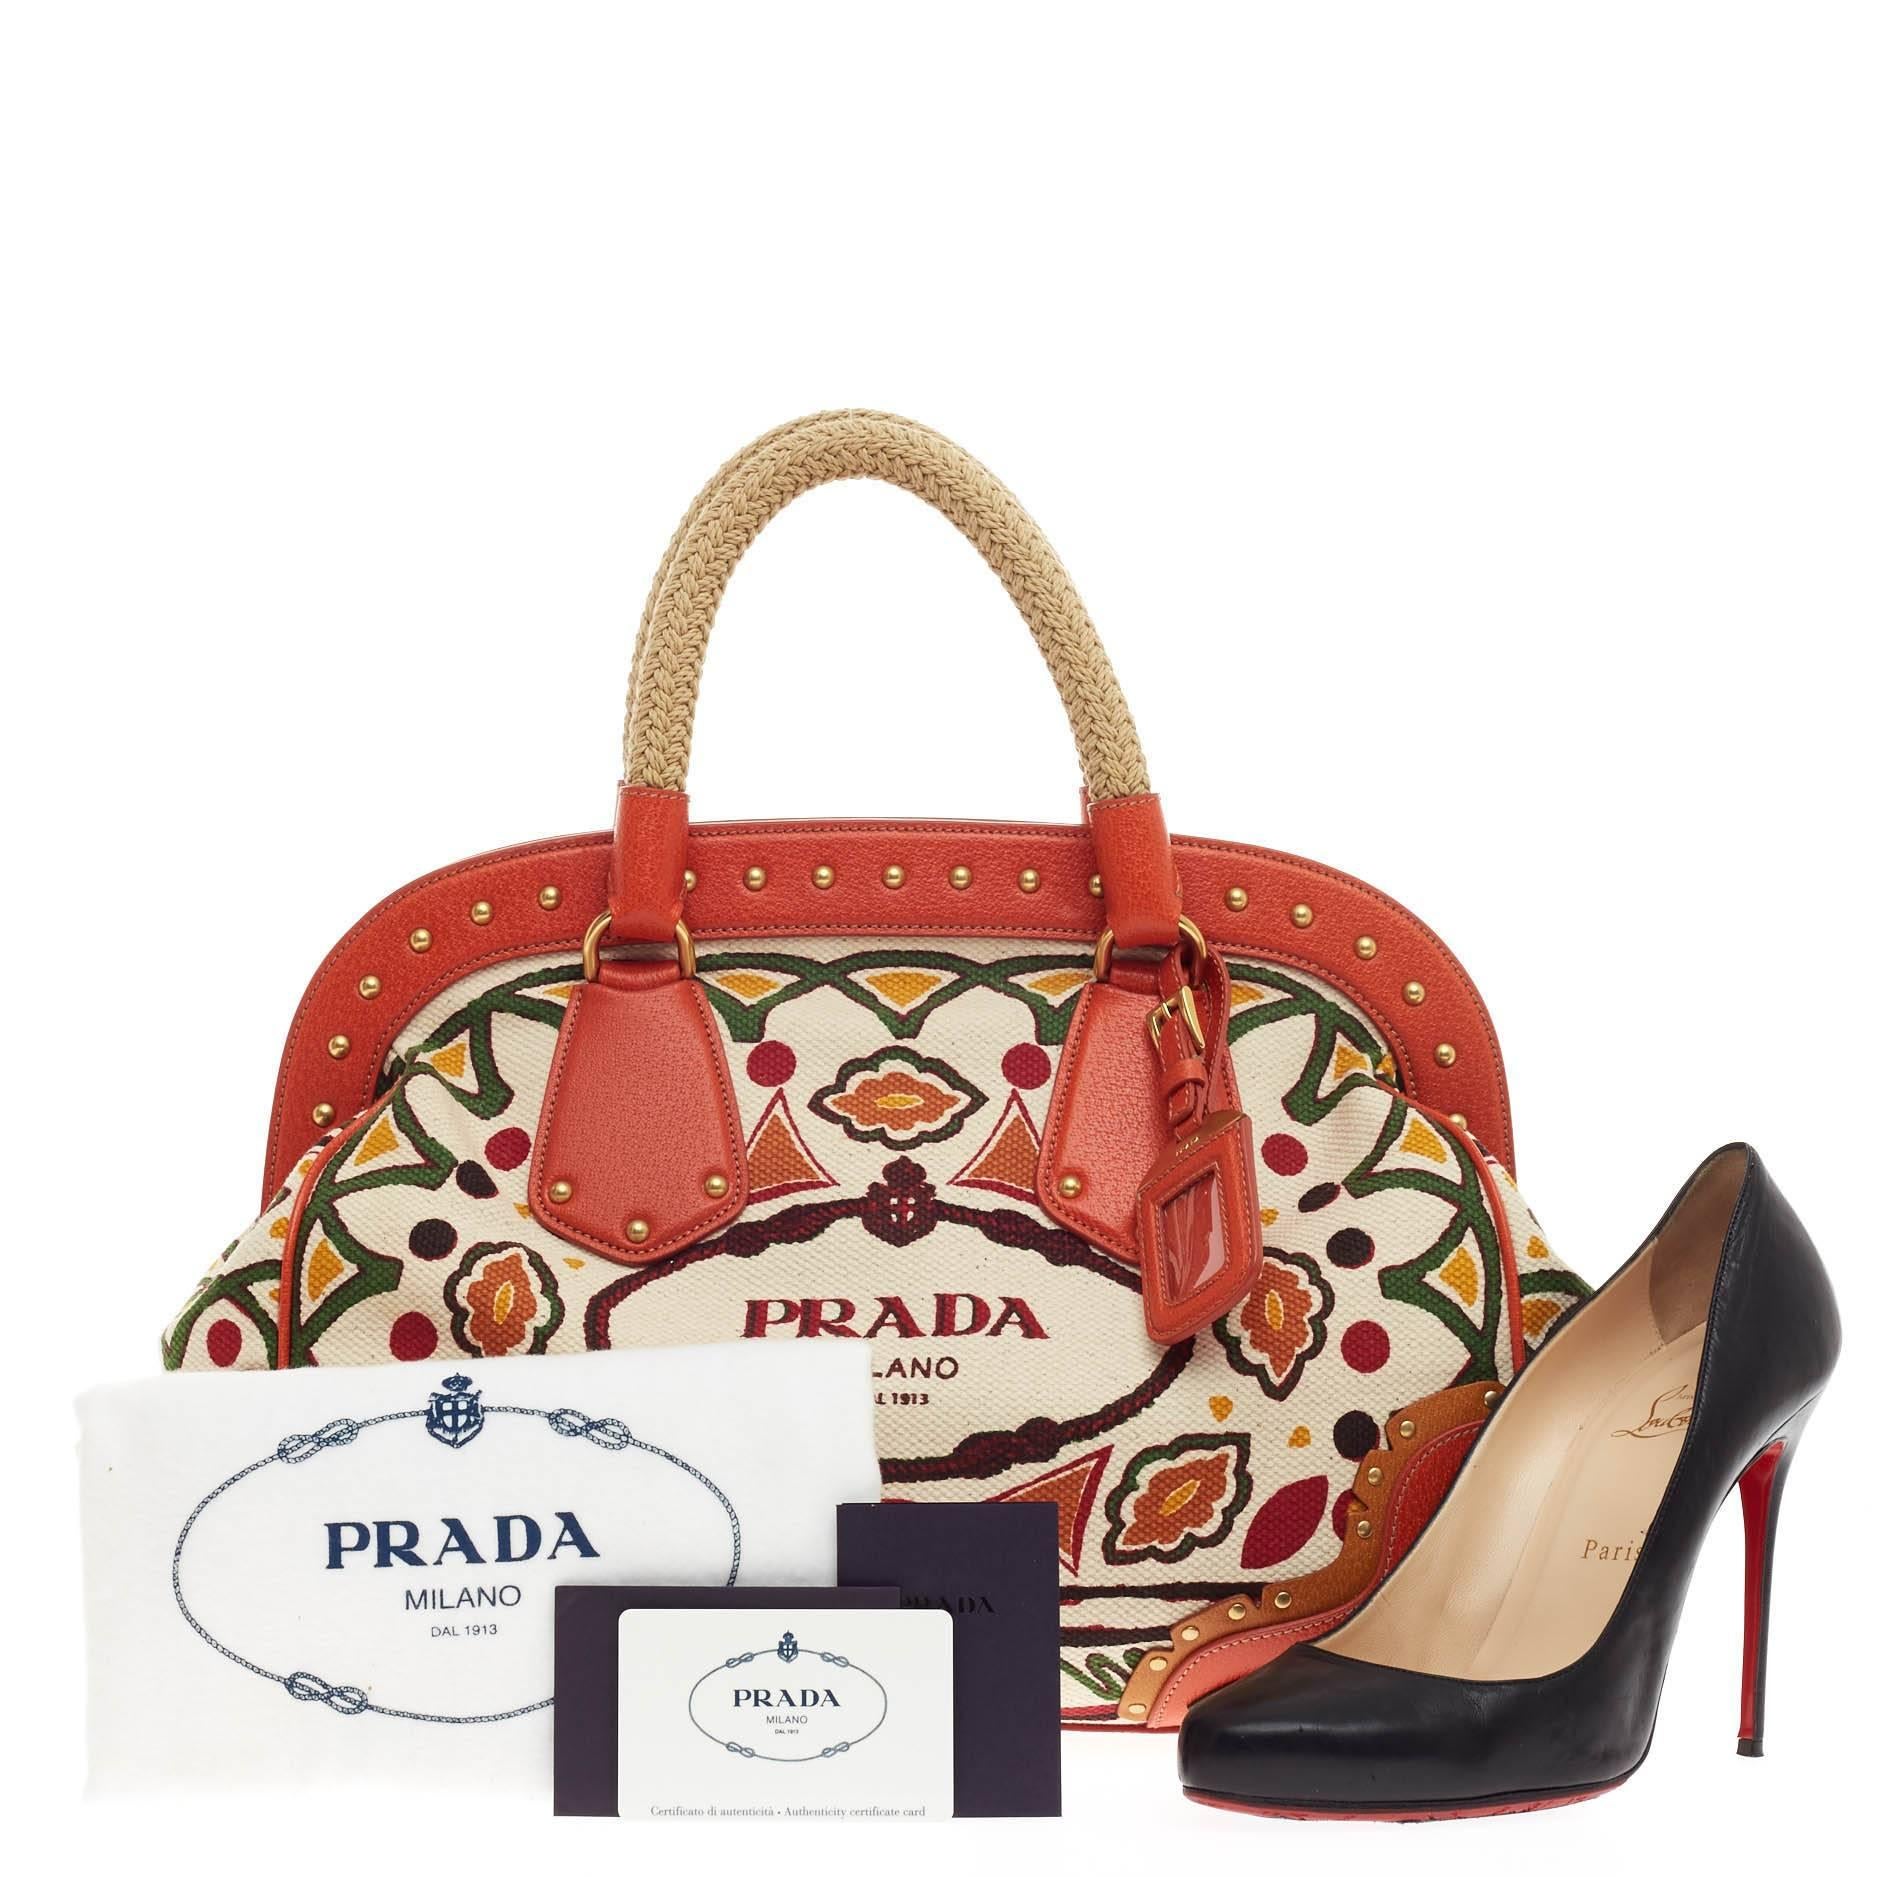 This authentic Prada Canapa Frame Satchel Printed Canvas Medium showcases the brand’s playful side with this vibrant stampata piece. Crafted from white canvas with explosive multicolored prints in orange, green, red and cream, this breezy satchel